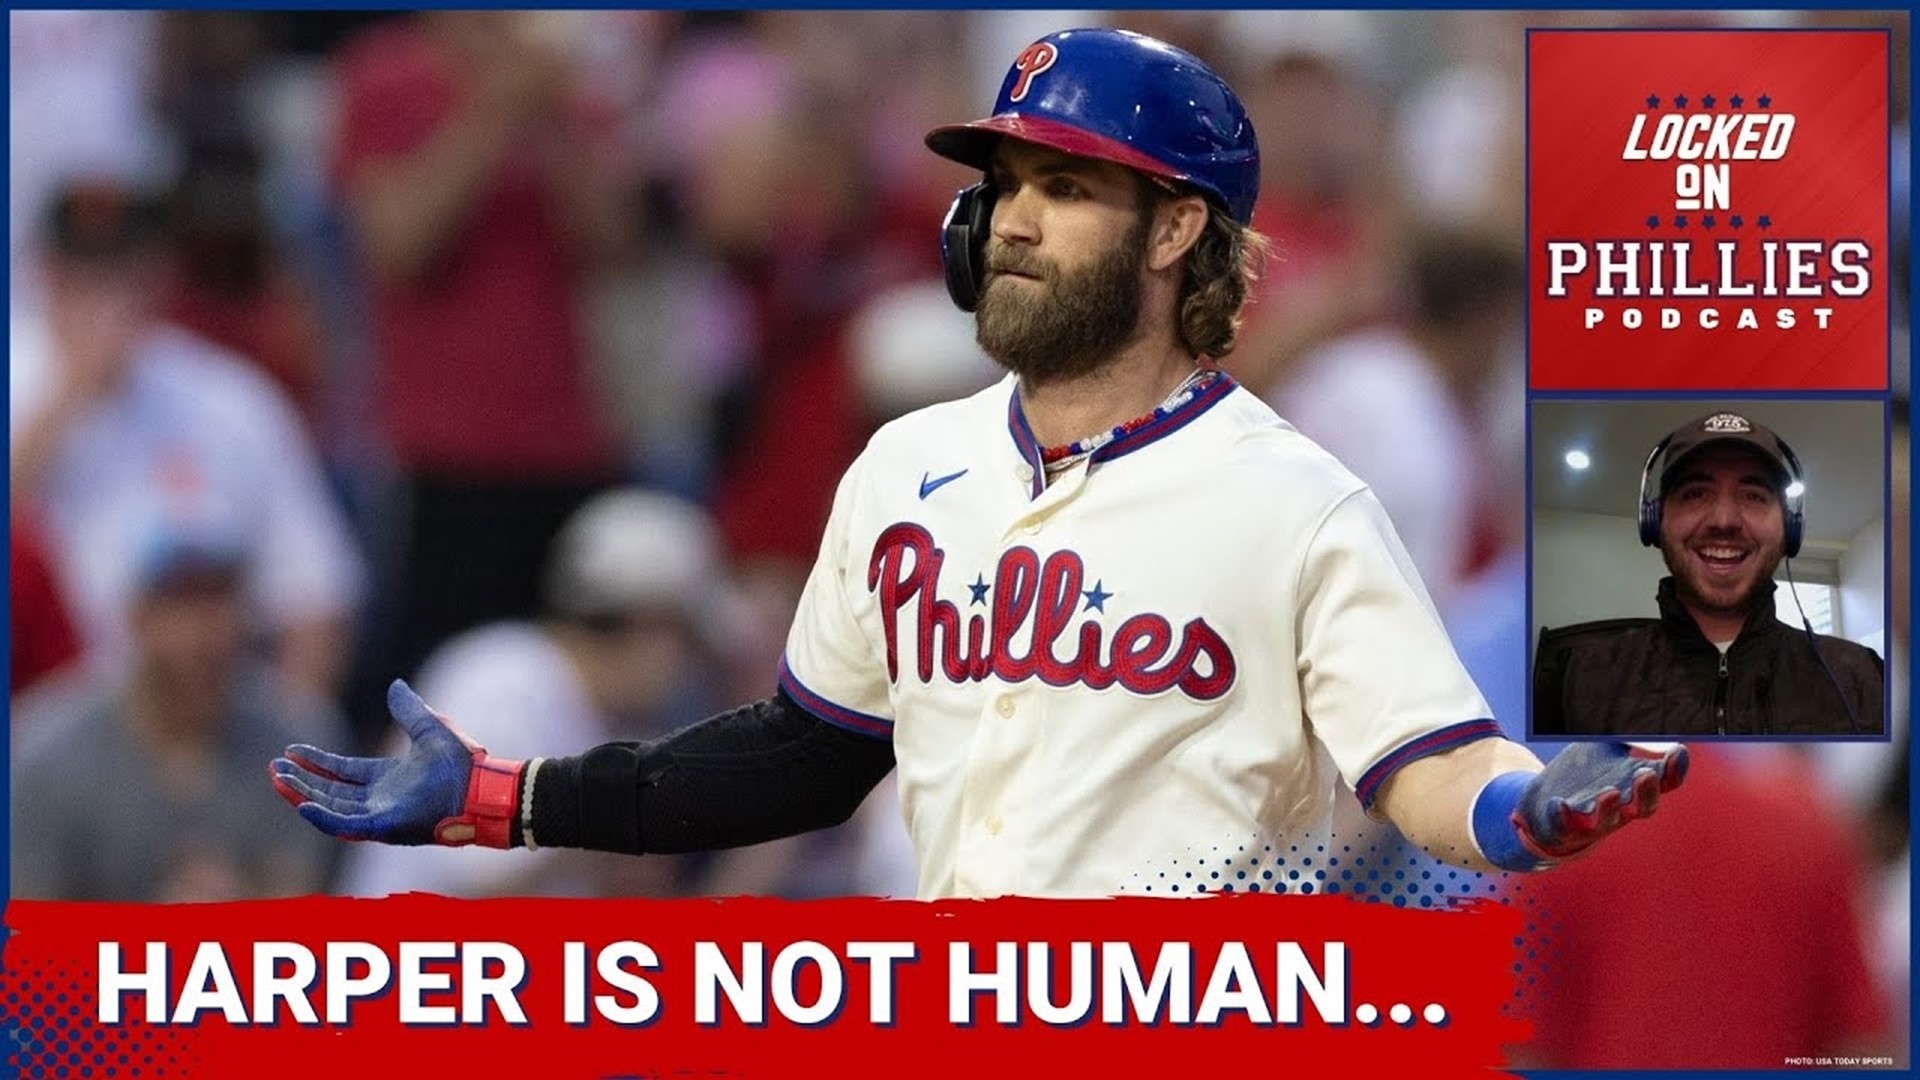 In today's episode, Connor reacts to the Philadelphia Phillies' extra inning loss to the San Francisco Giants.